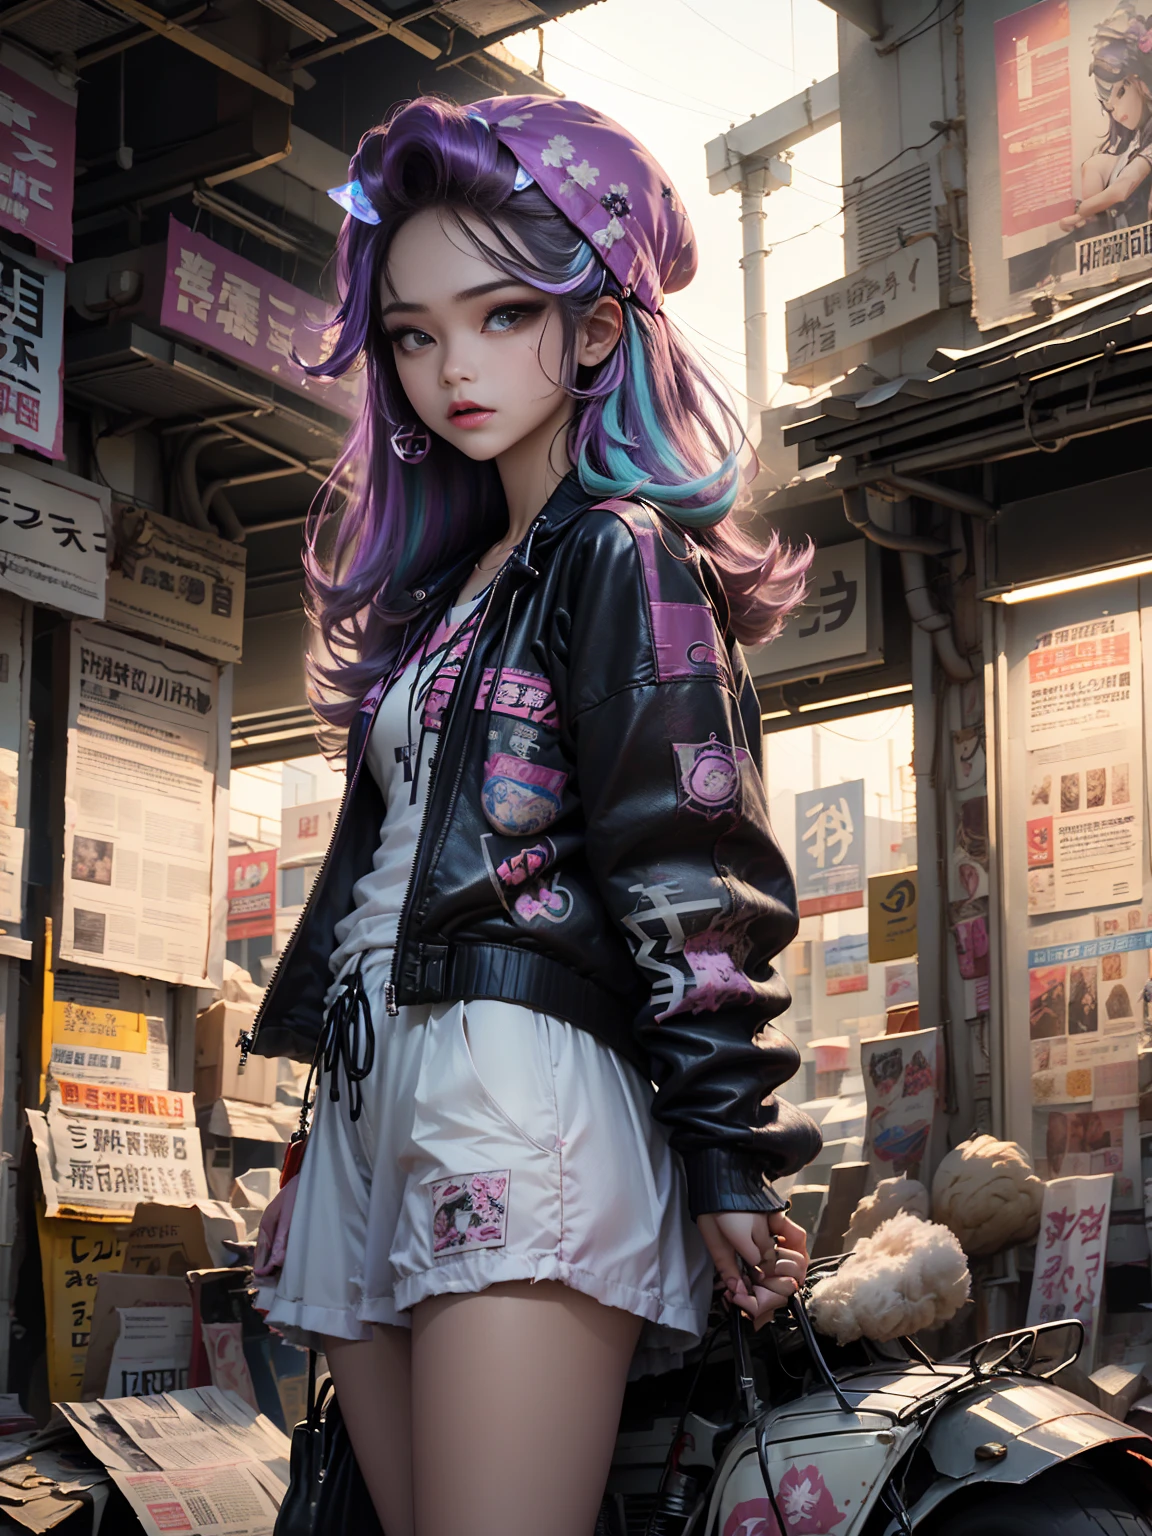 ((Stunning masterpiece anime illustration.)), ((Extremely delicate and beautiful cyber girl.)), ((Very detailed and exposed face)), ((mechanical member, )), (tube connections that join the neck:1.2), ((mass of wires and cables in the body)), ((wearing a colorful Harajuku technical jacket with logo)), (dynamic pose), ((futuristic motorcycle on left side)), ((at night sky with smog)),(Masterpiece), (((Best Quality))), ((ultra detailed)), (Highly detailed photorealistic CG illustration), cinematic lighting, Science fiction, extremely detailed,showy,more detail, (((cyberpunk city background, (Rewarded accommodation), harajuku district))), NSFW, Looking to the camera, head on